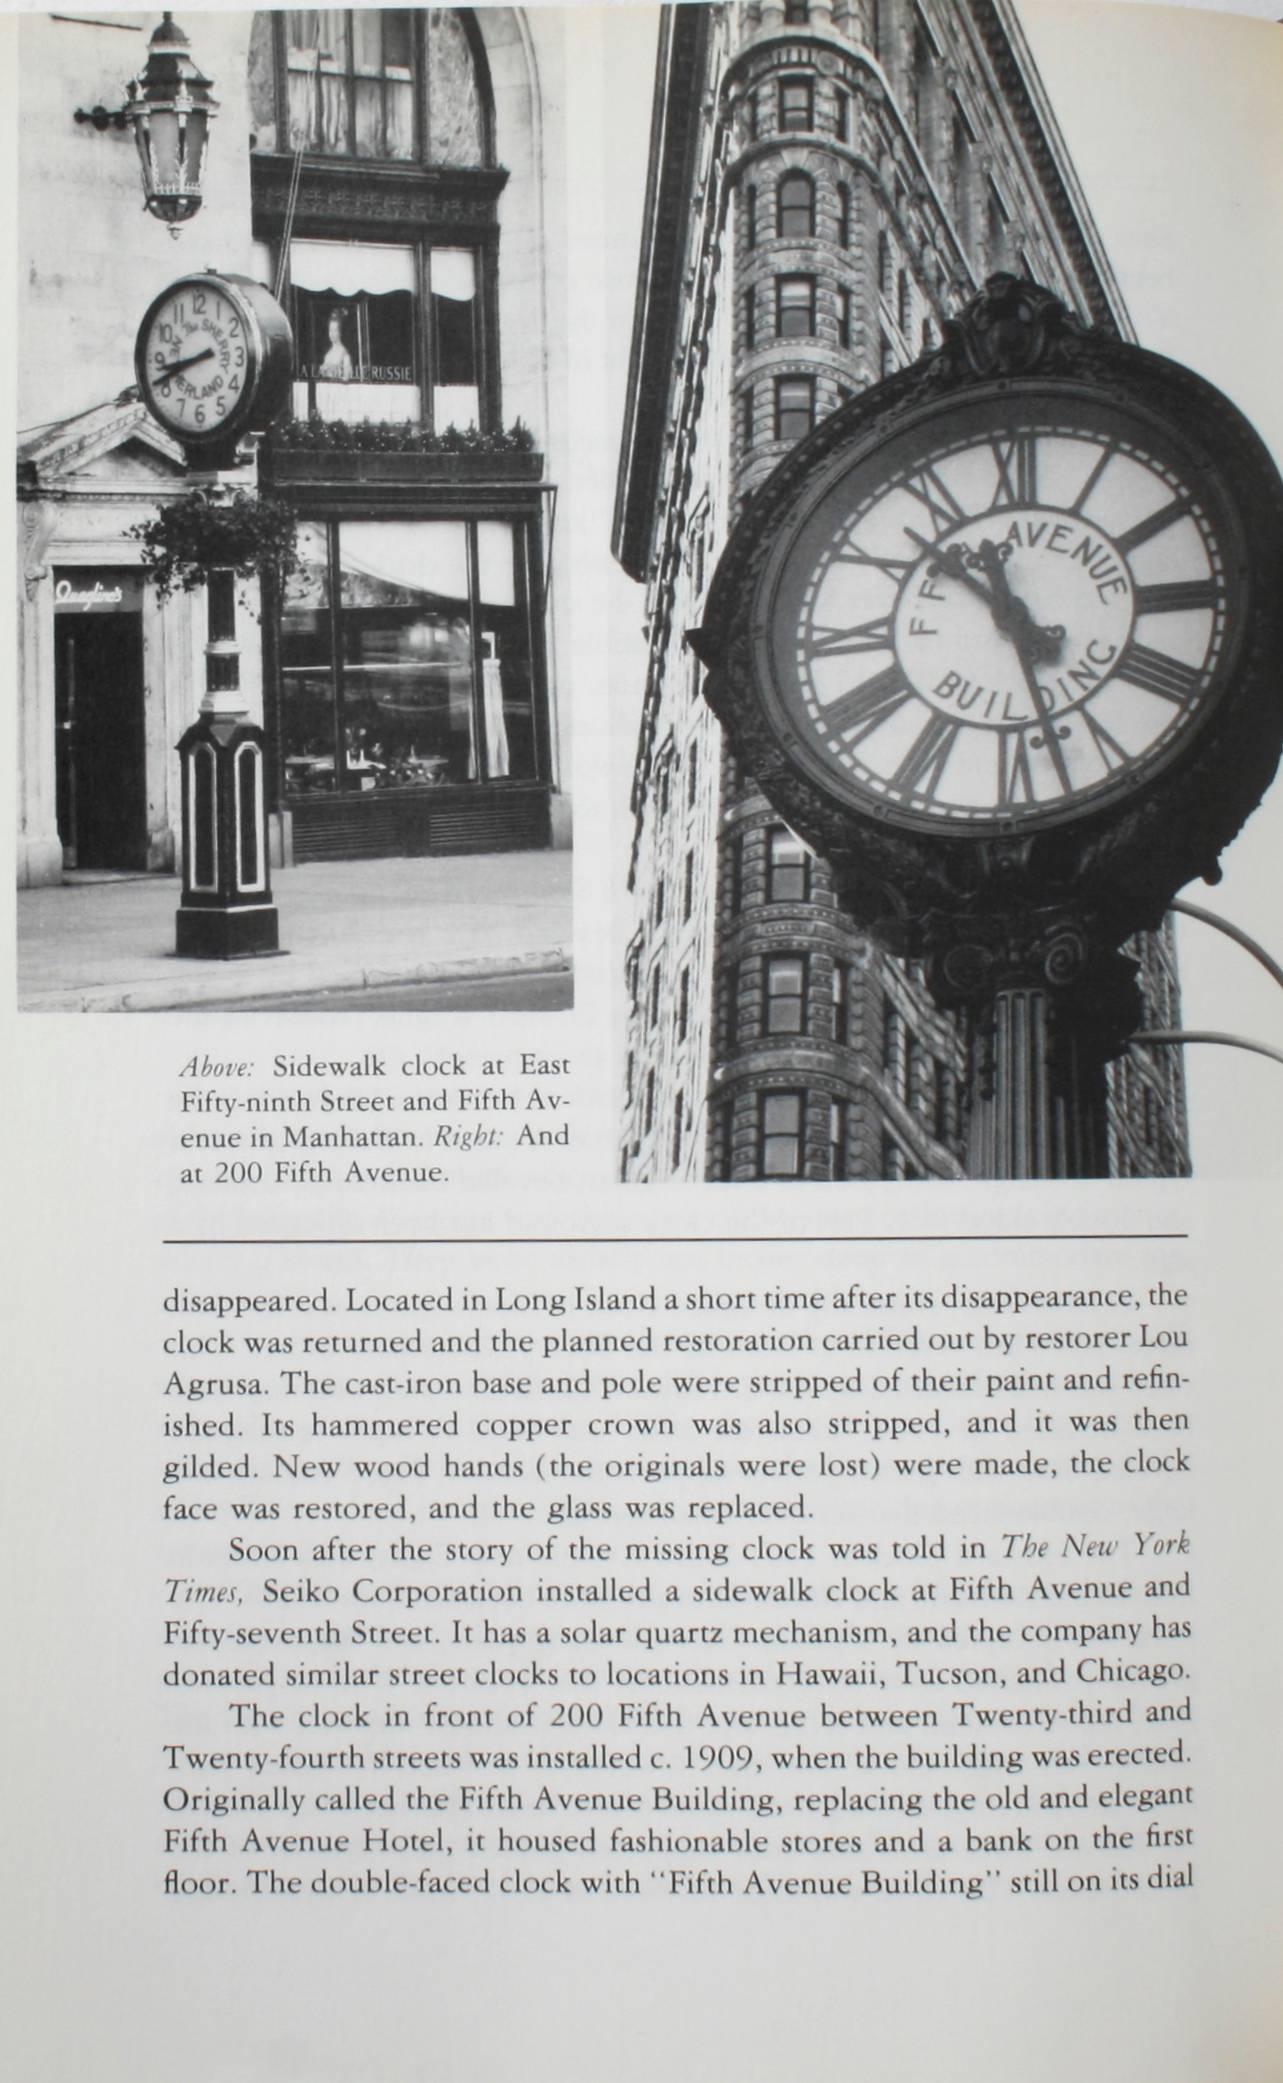 Monuments and Masterpieces Histories and Views of Public Sculpture in NYC 1st Ed For Sale 4